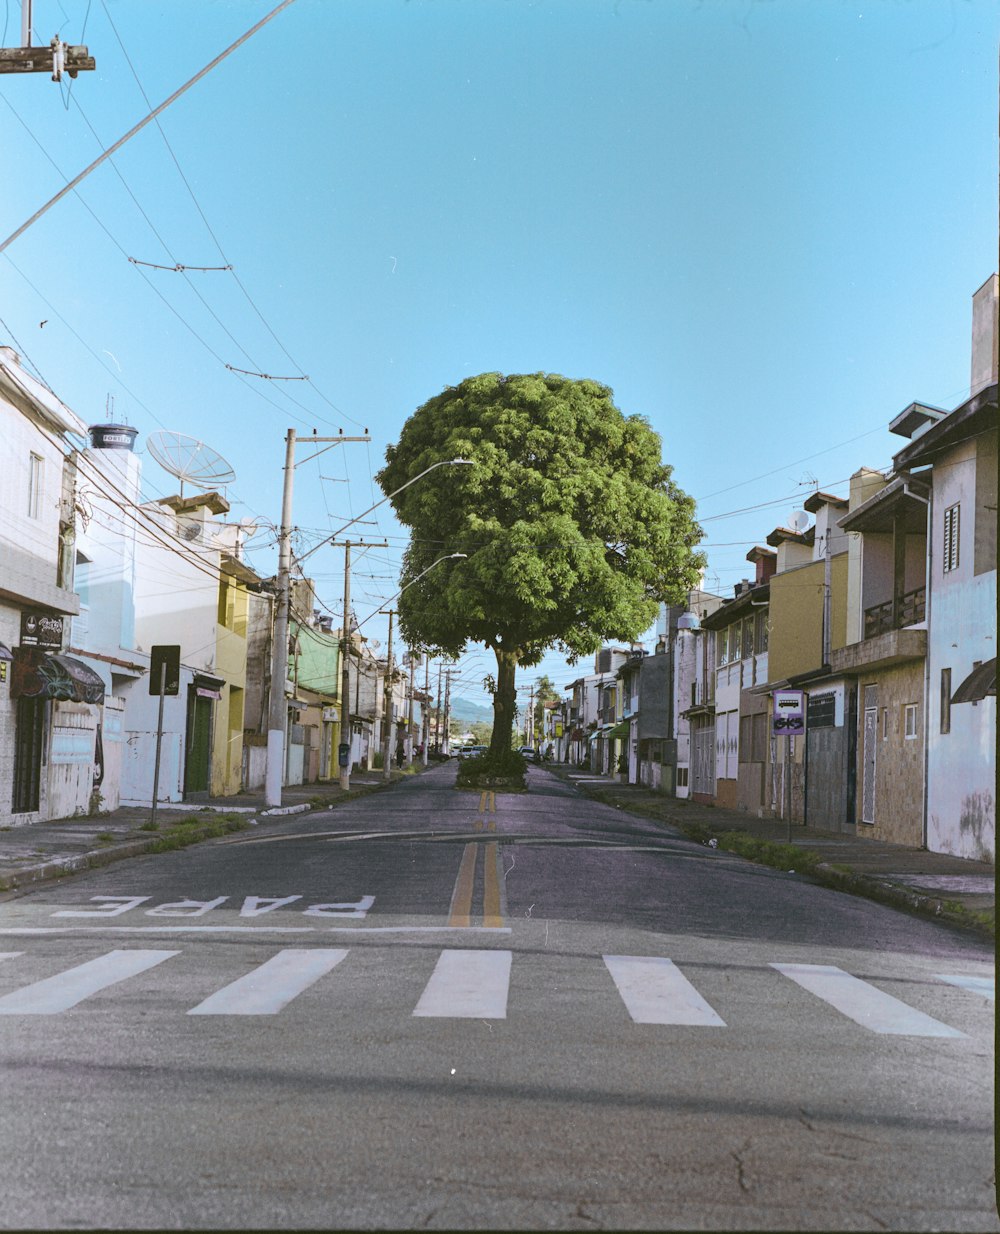 a tree is growing in the middle of a street